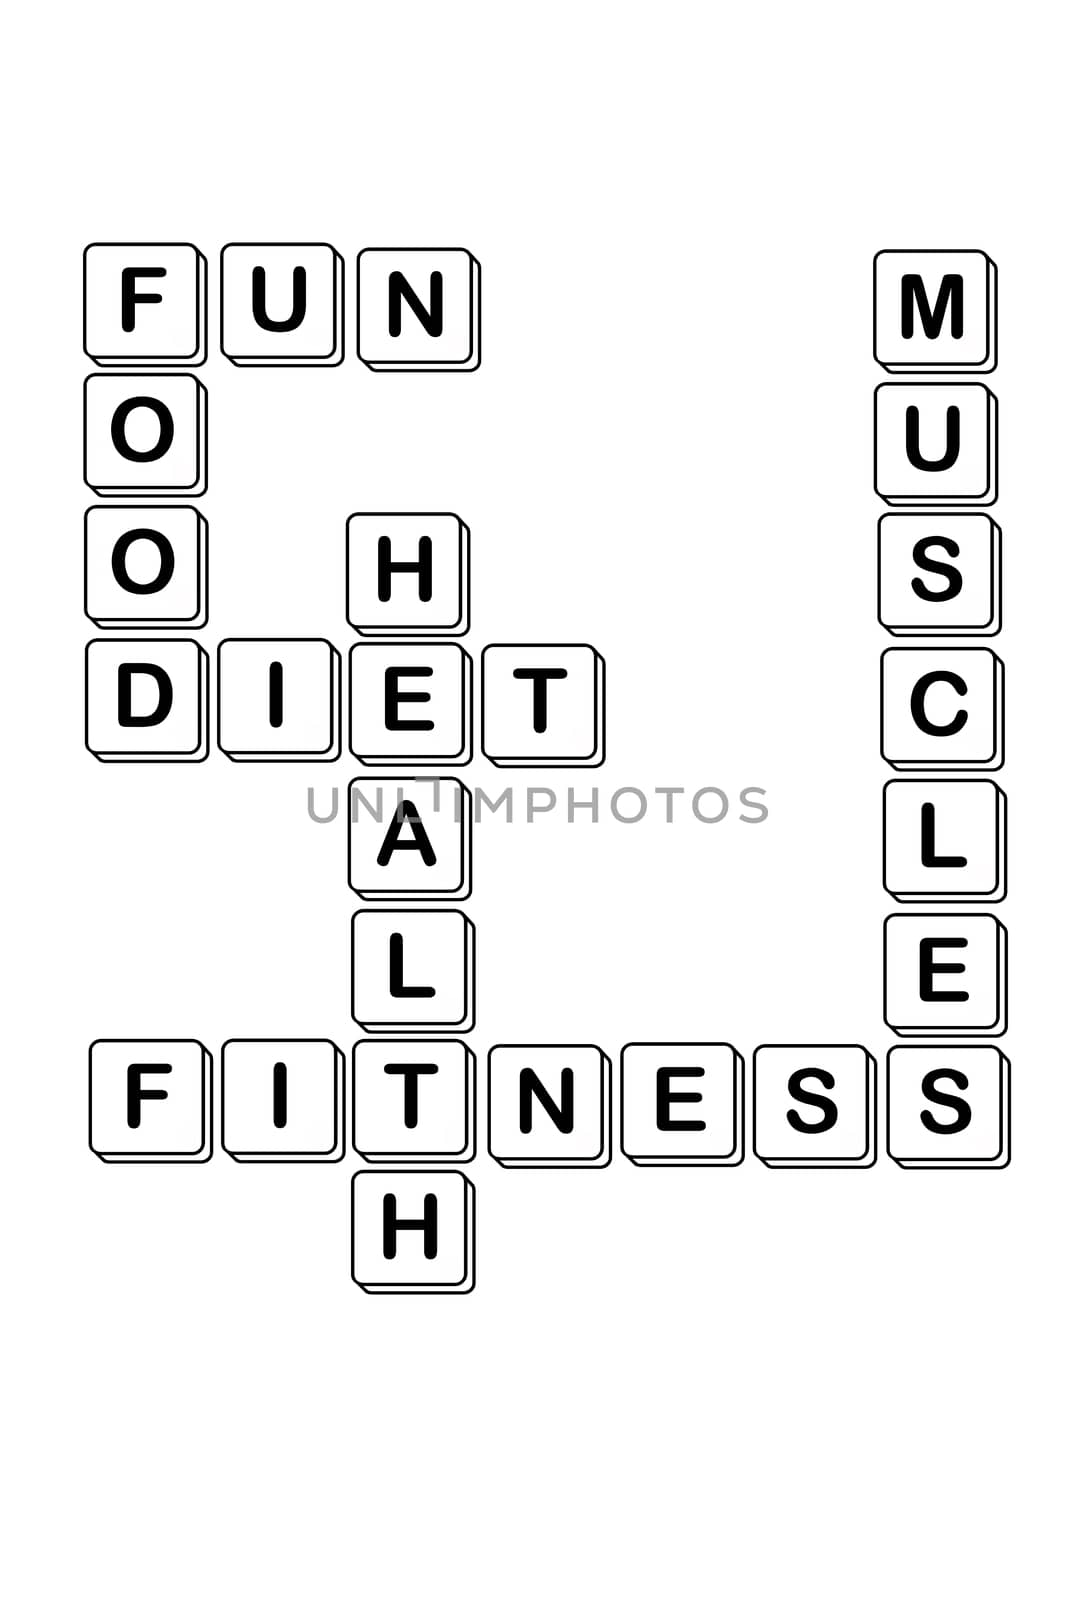 diet crossword made of letters in square by a3701027